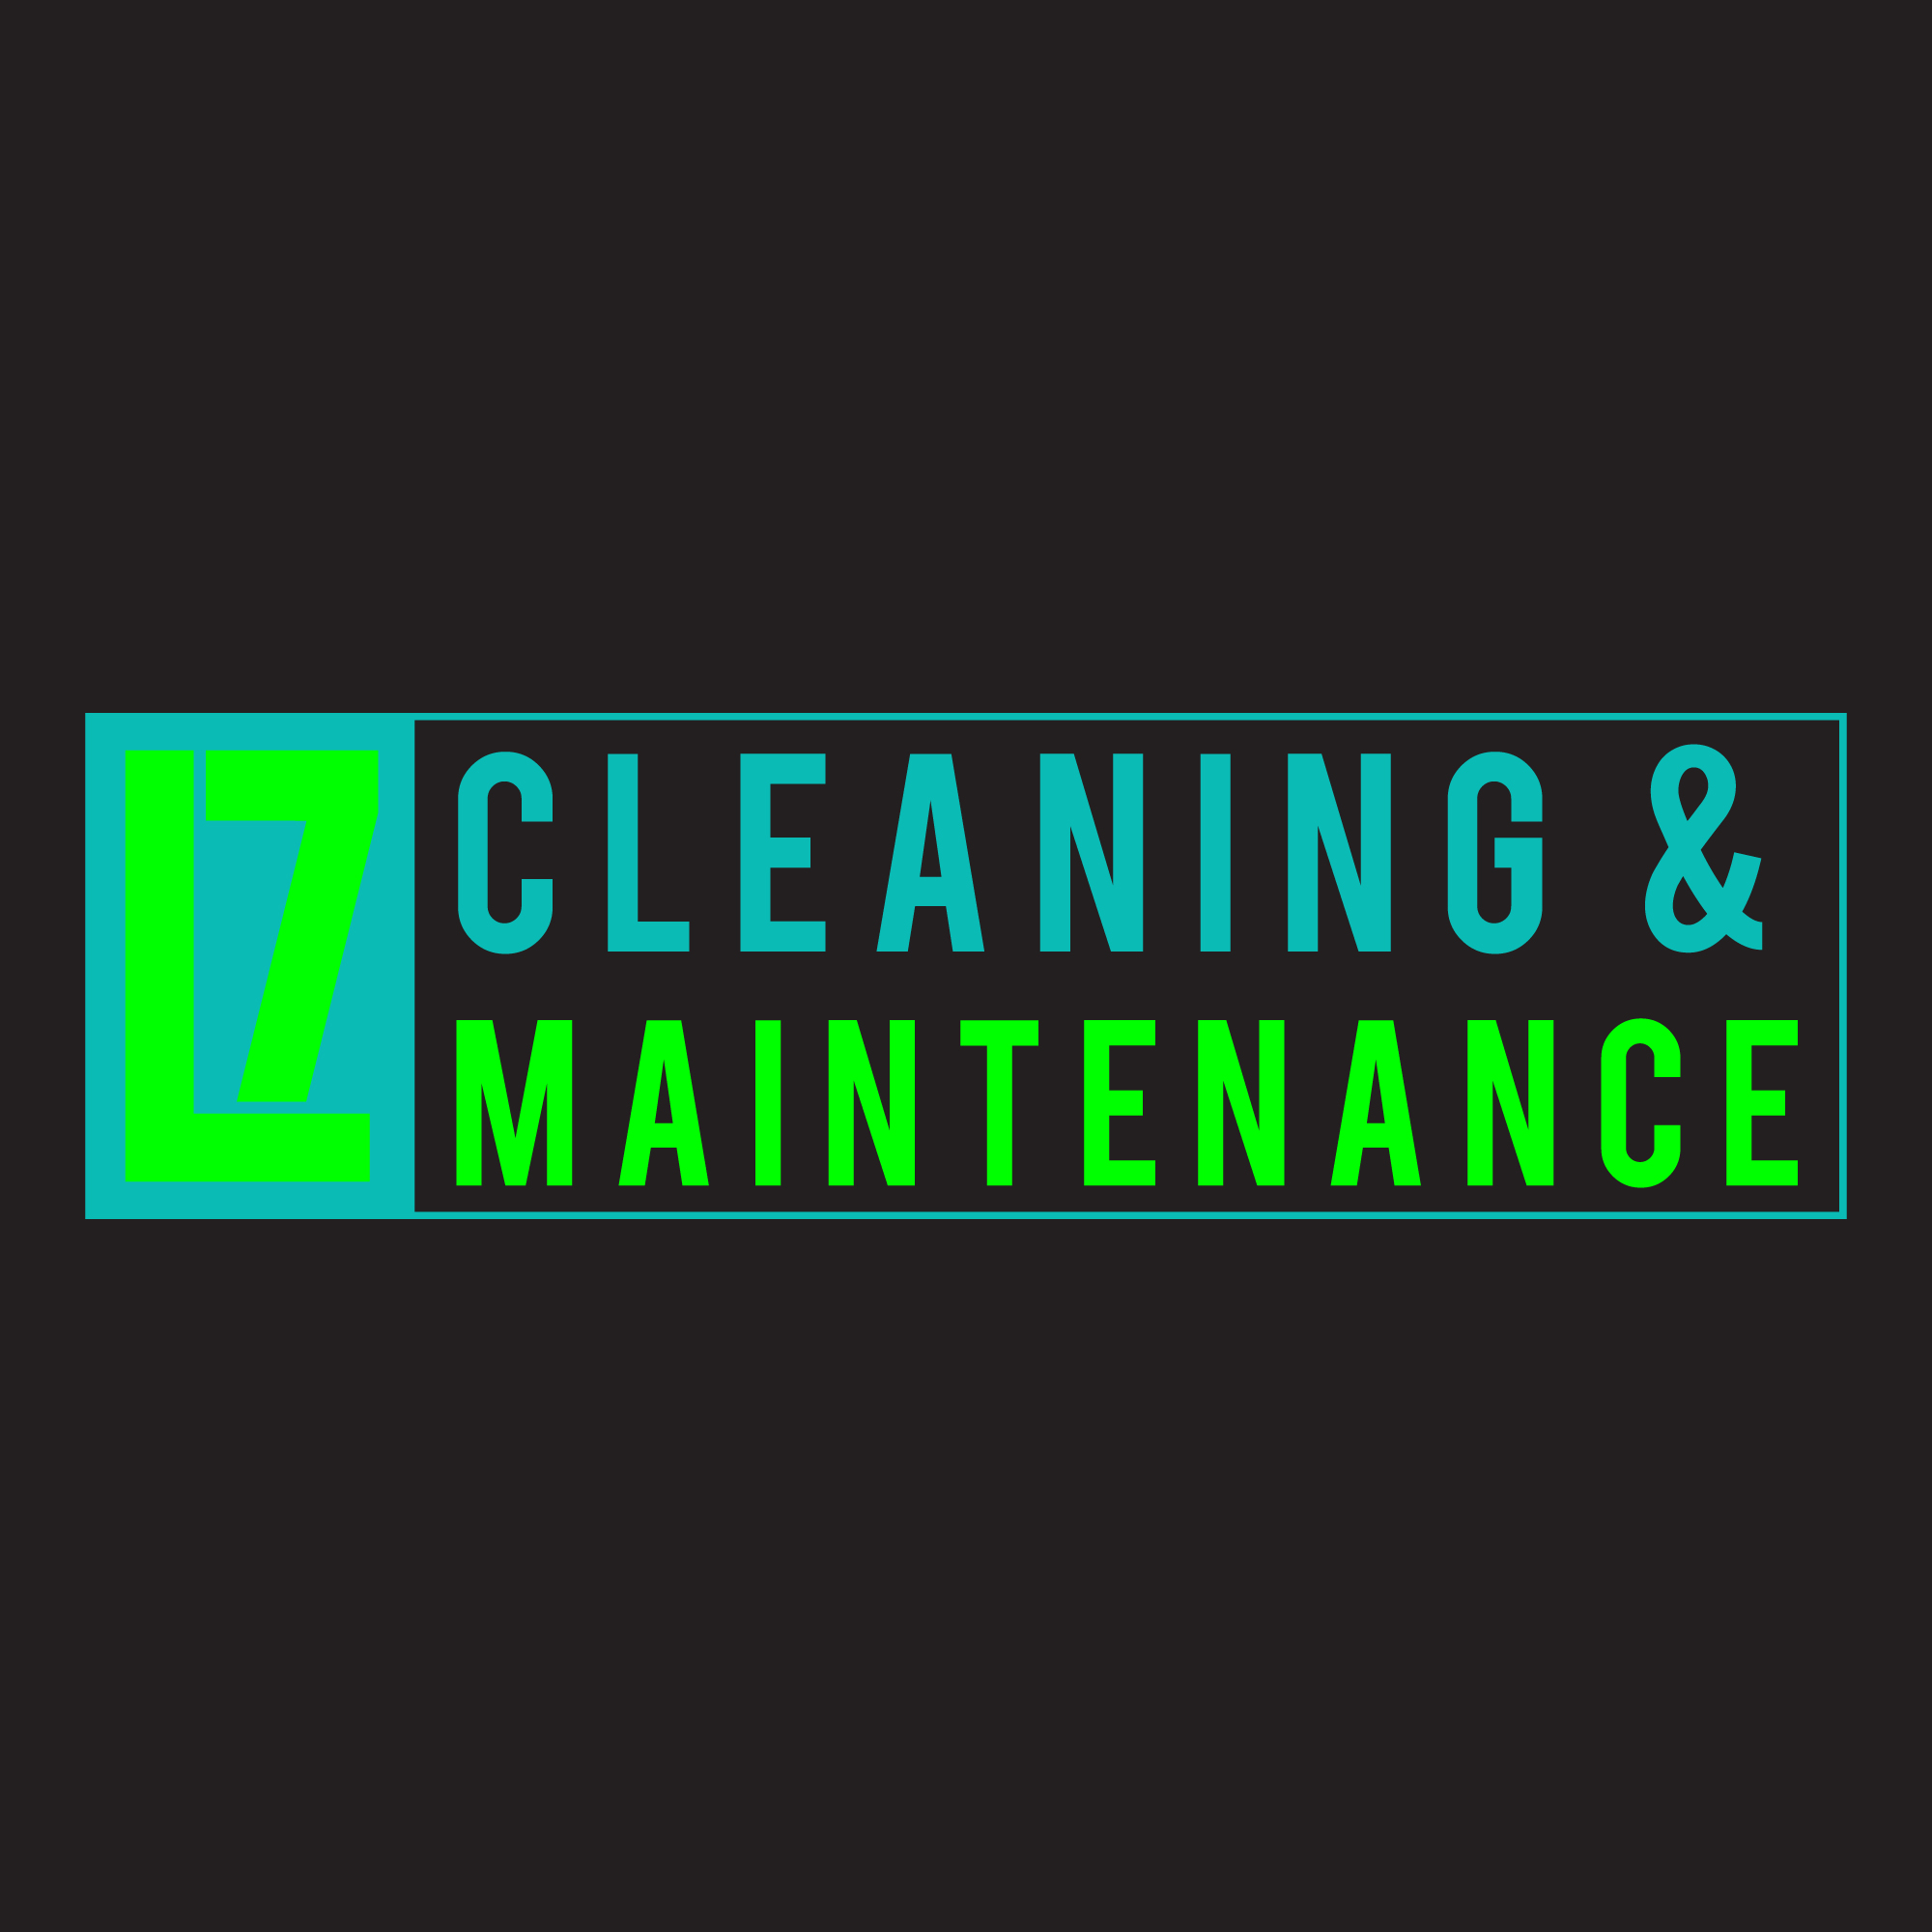 L7 Cleaning and Maintenance Logo